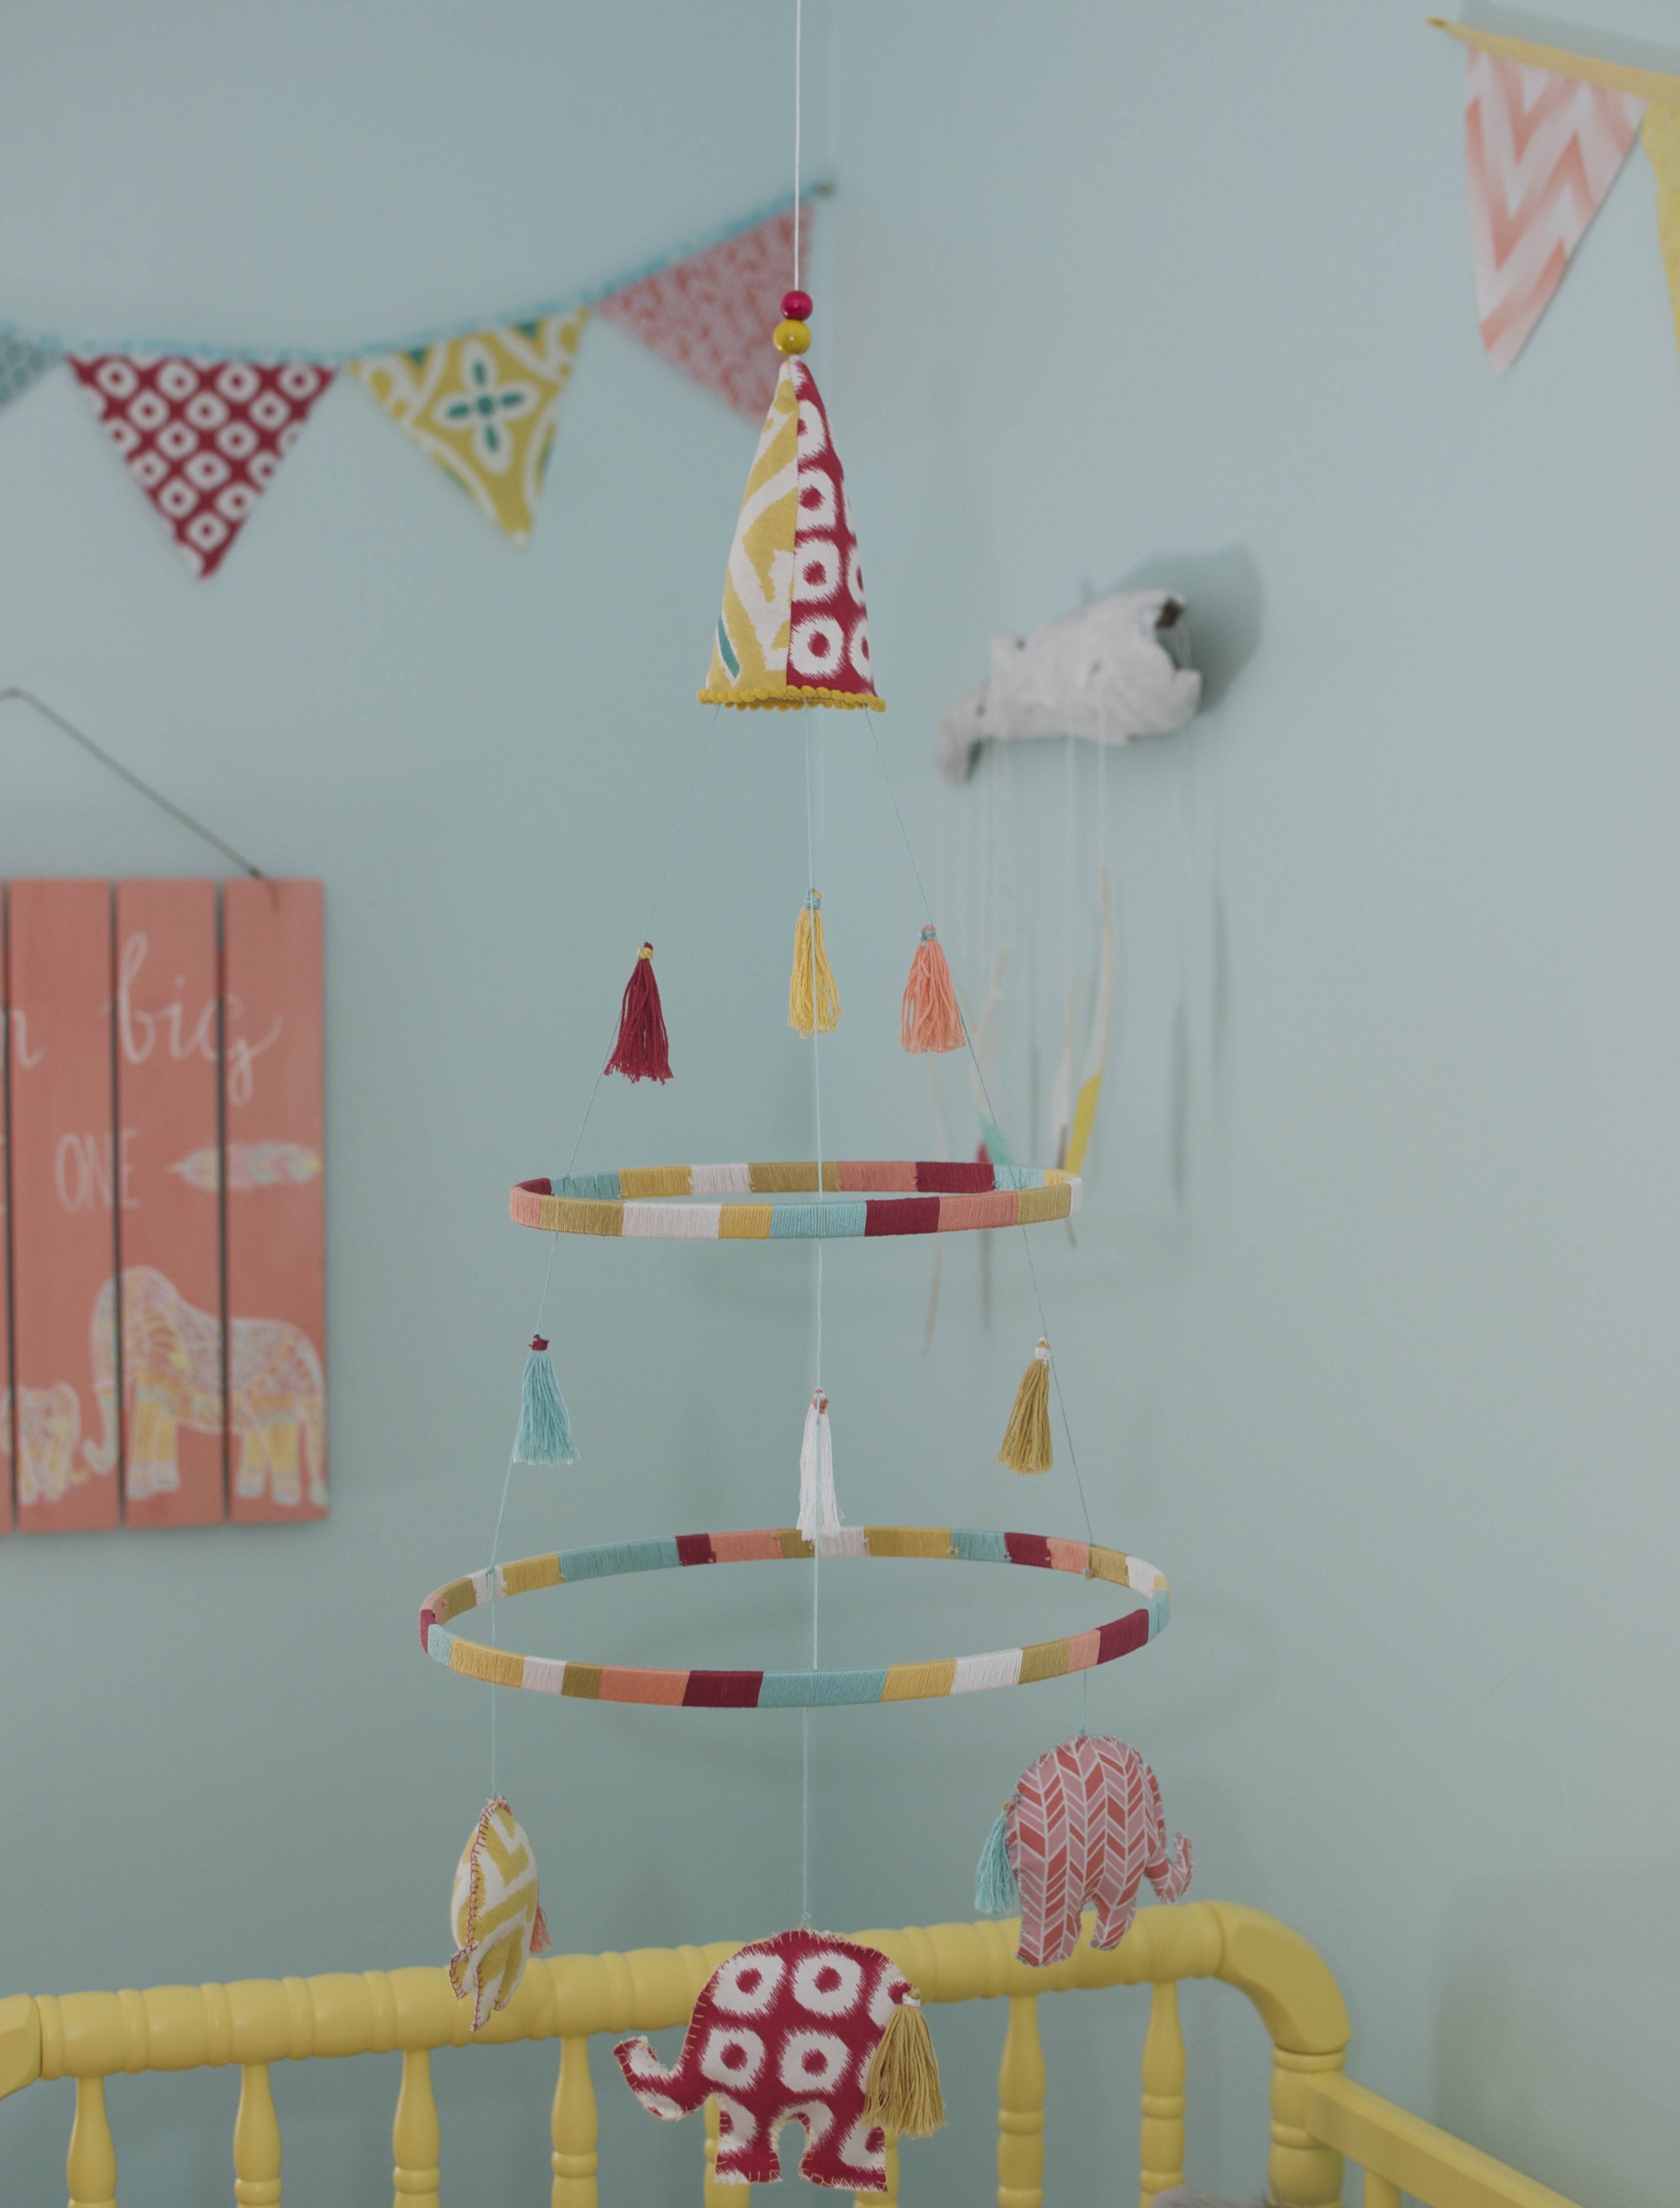 DIY Embroidery Hoop Mobile with Tassel and Sewed Elephants